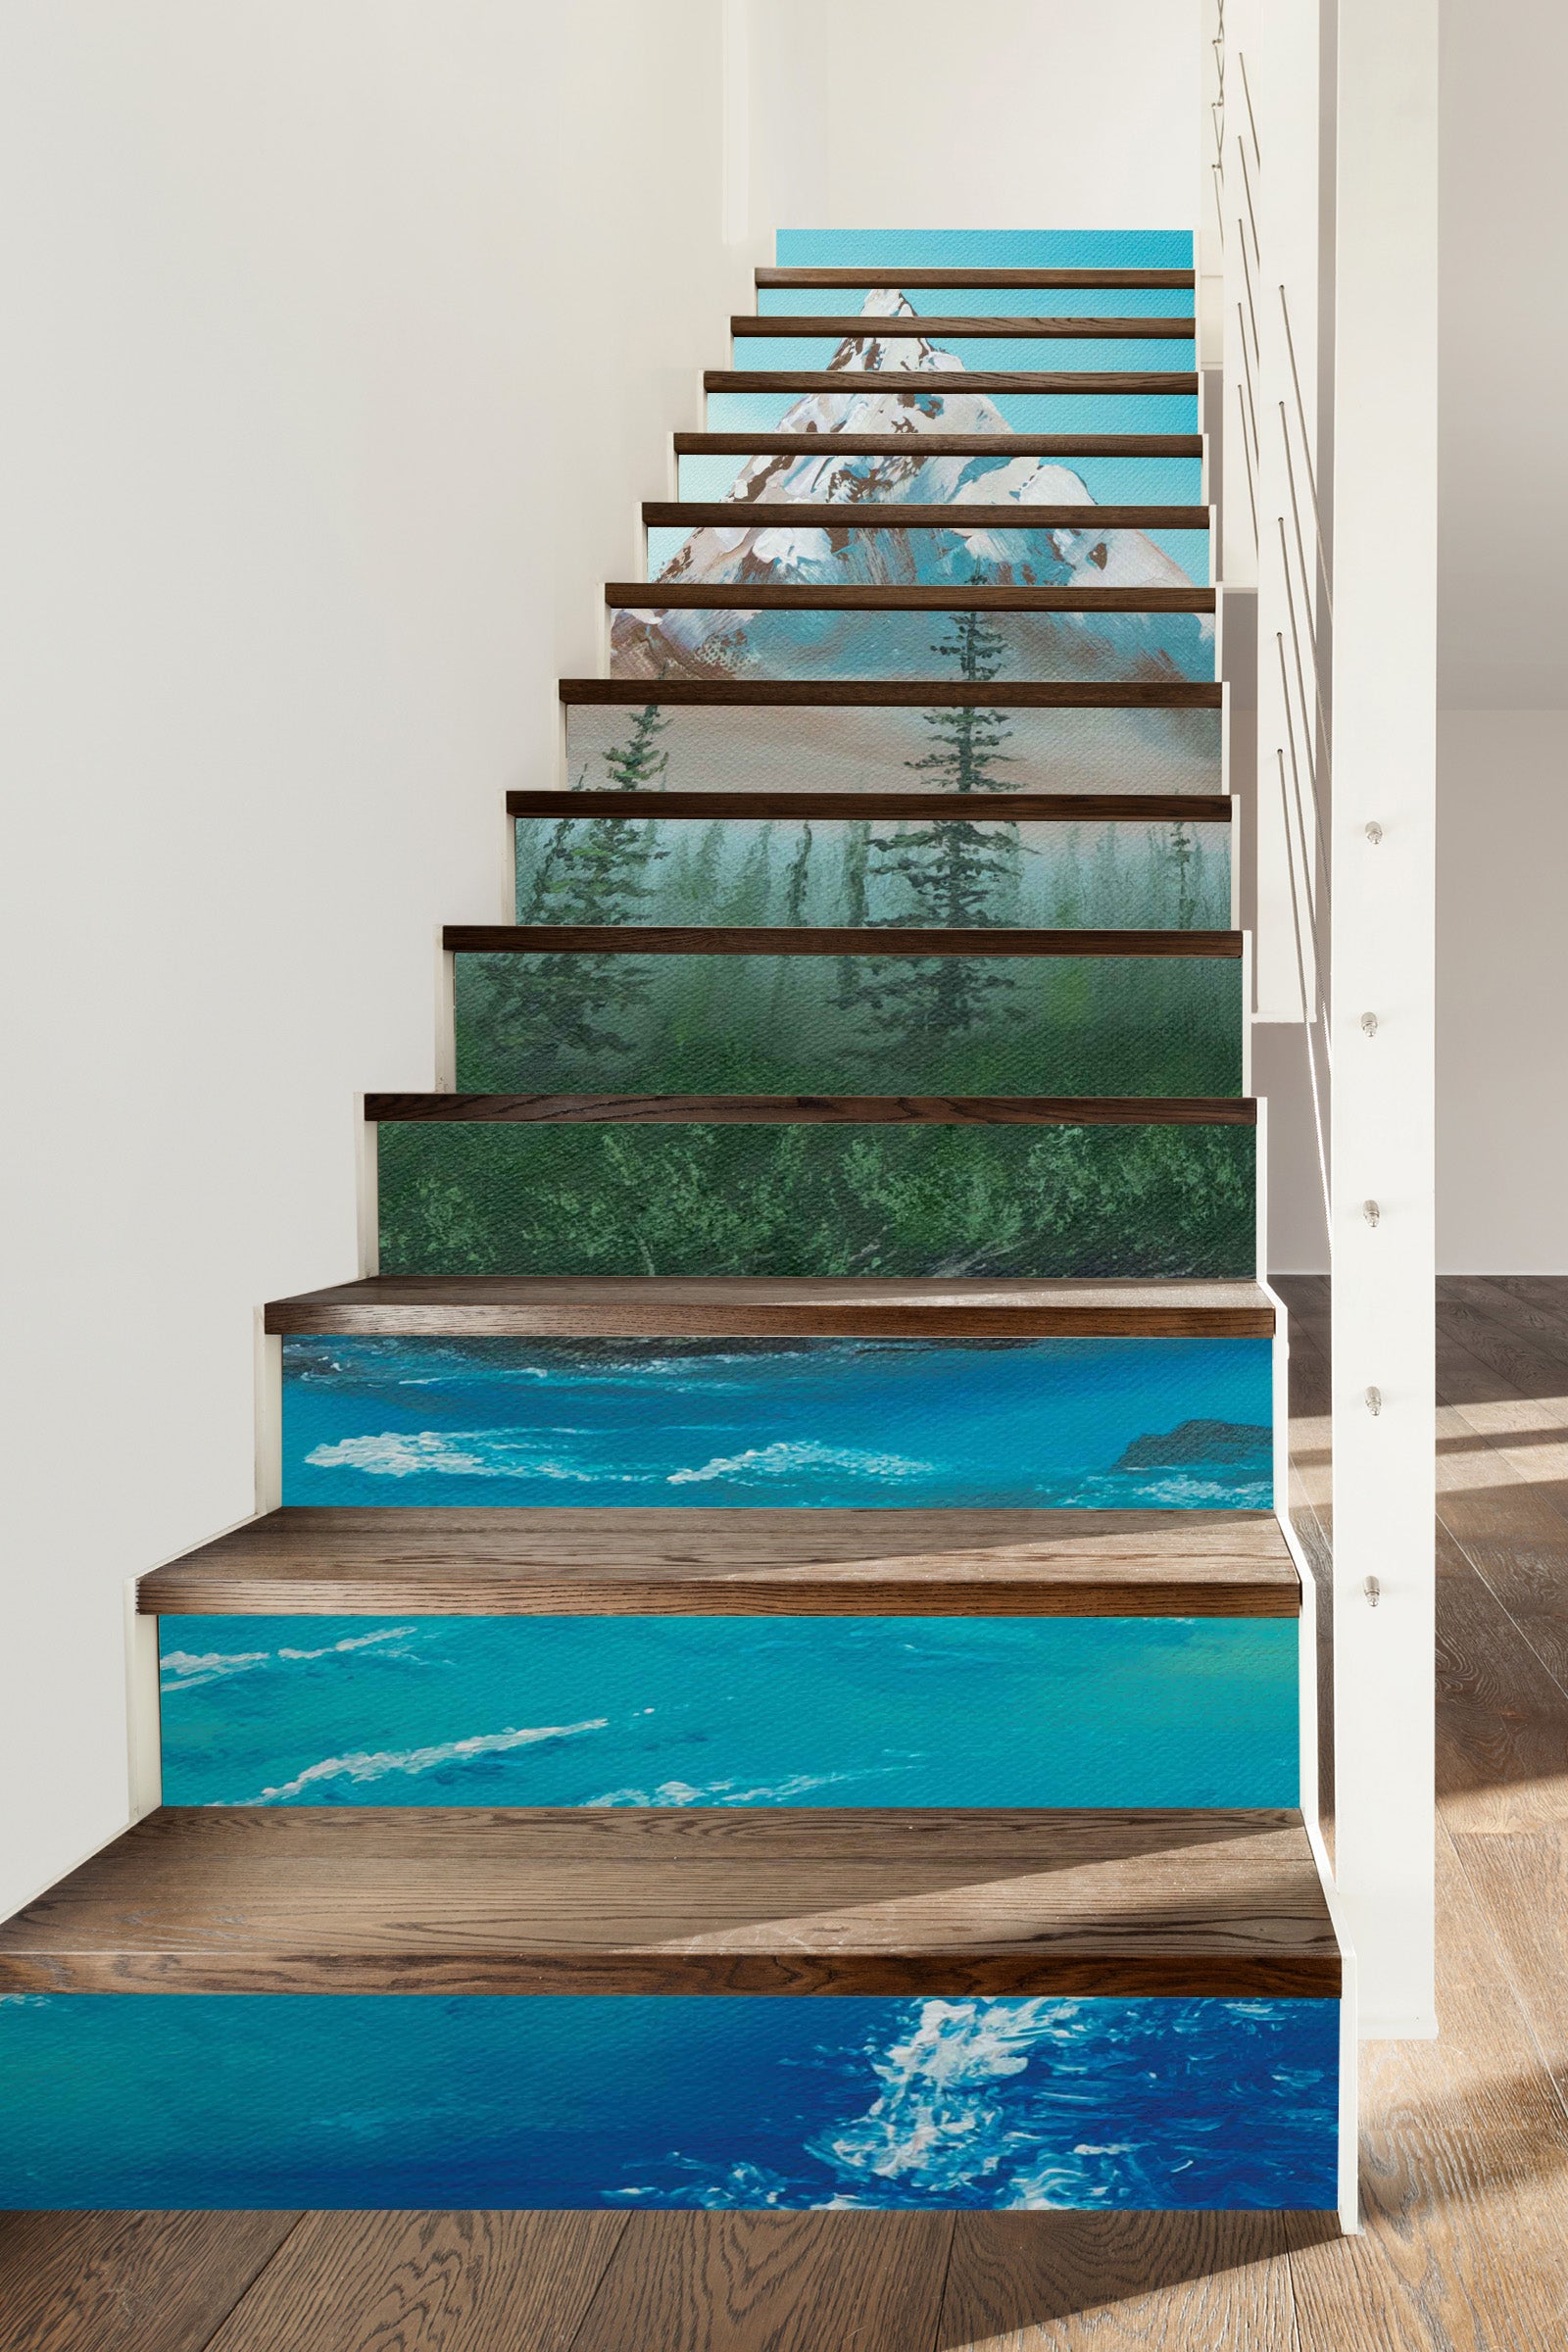 3D Snow Mountain River Forest 9479 Marina Zotova Stair Risers